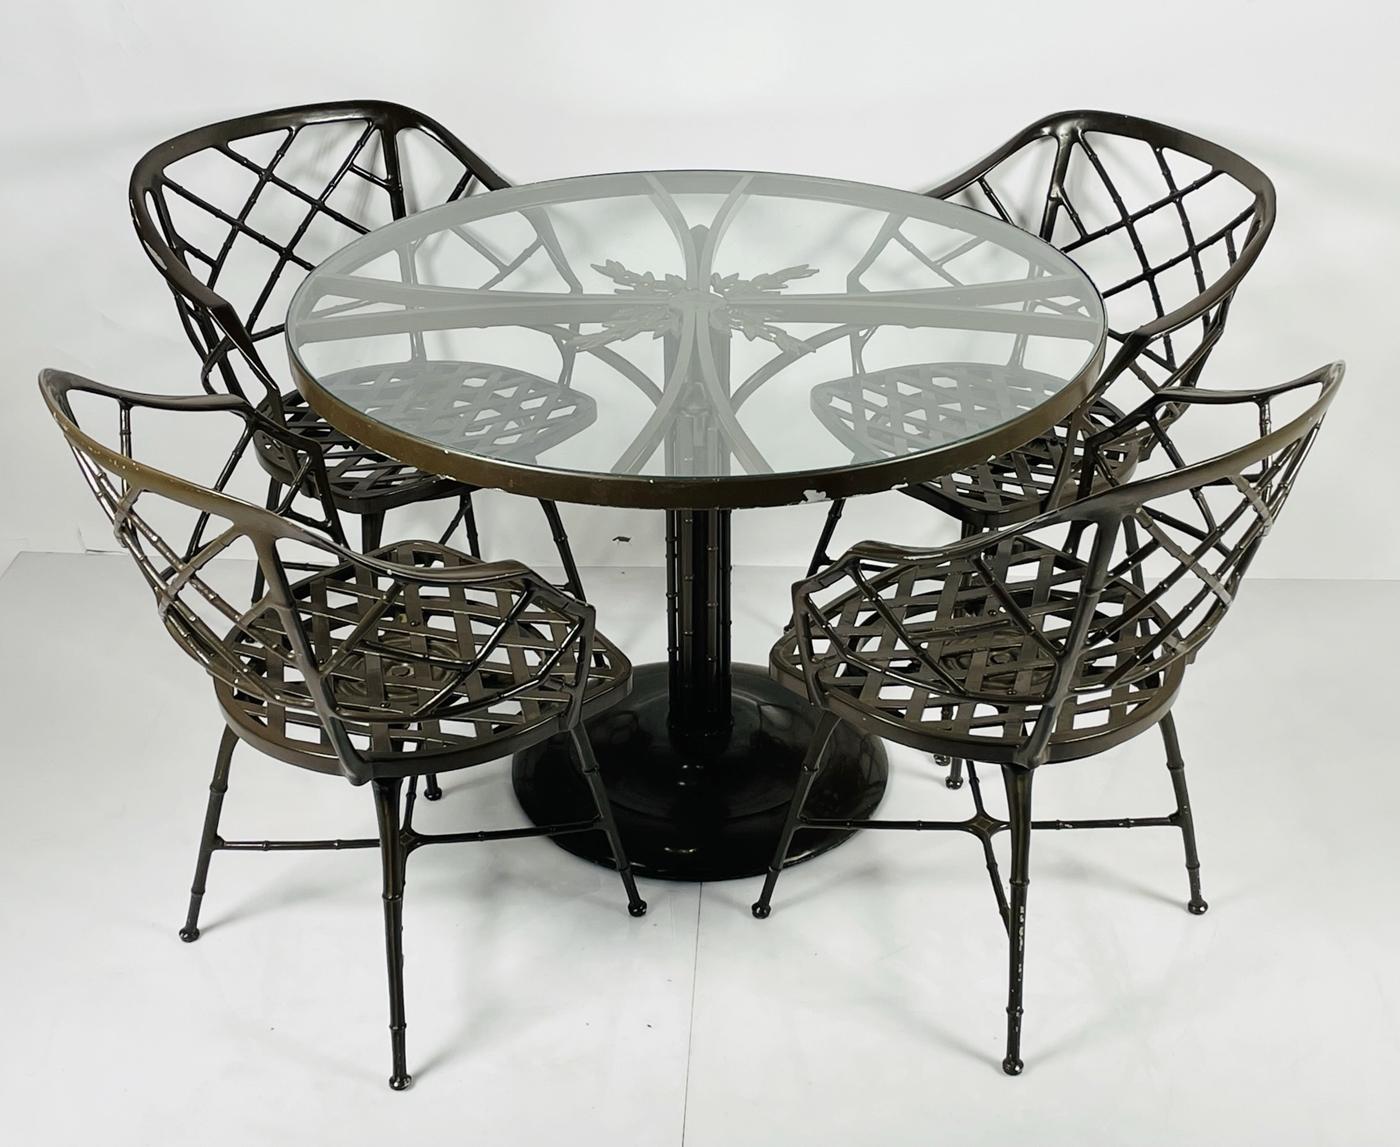 A fabulous table and four coordinating chairs. Made by the iconic Brown Jordan. Part of their Classic ll series. 

The table retains the original label, the chairs come with a cloth seat pad.

Measurements:
Table:
41 3/8 inches diameter x 29